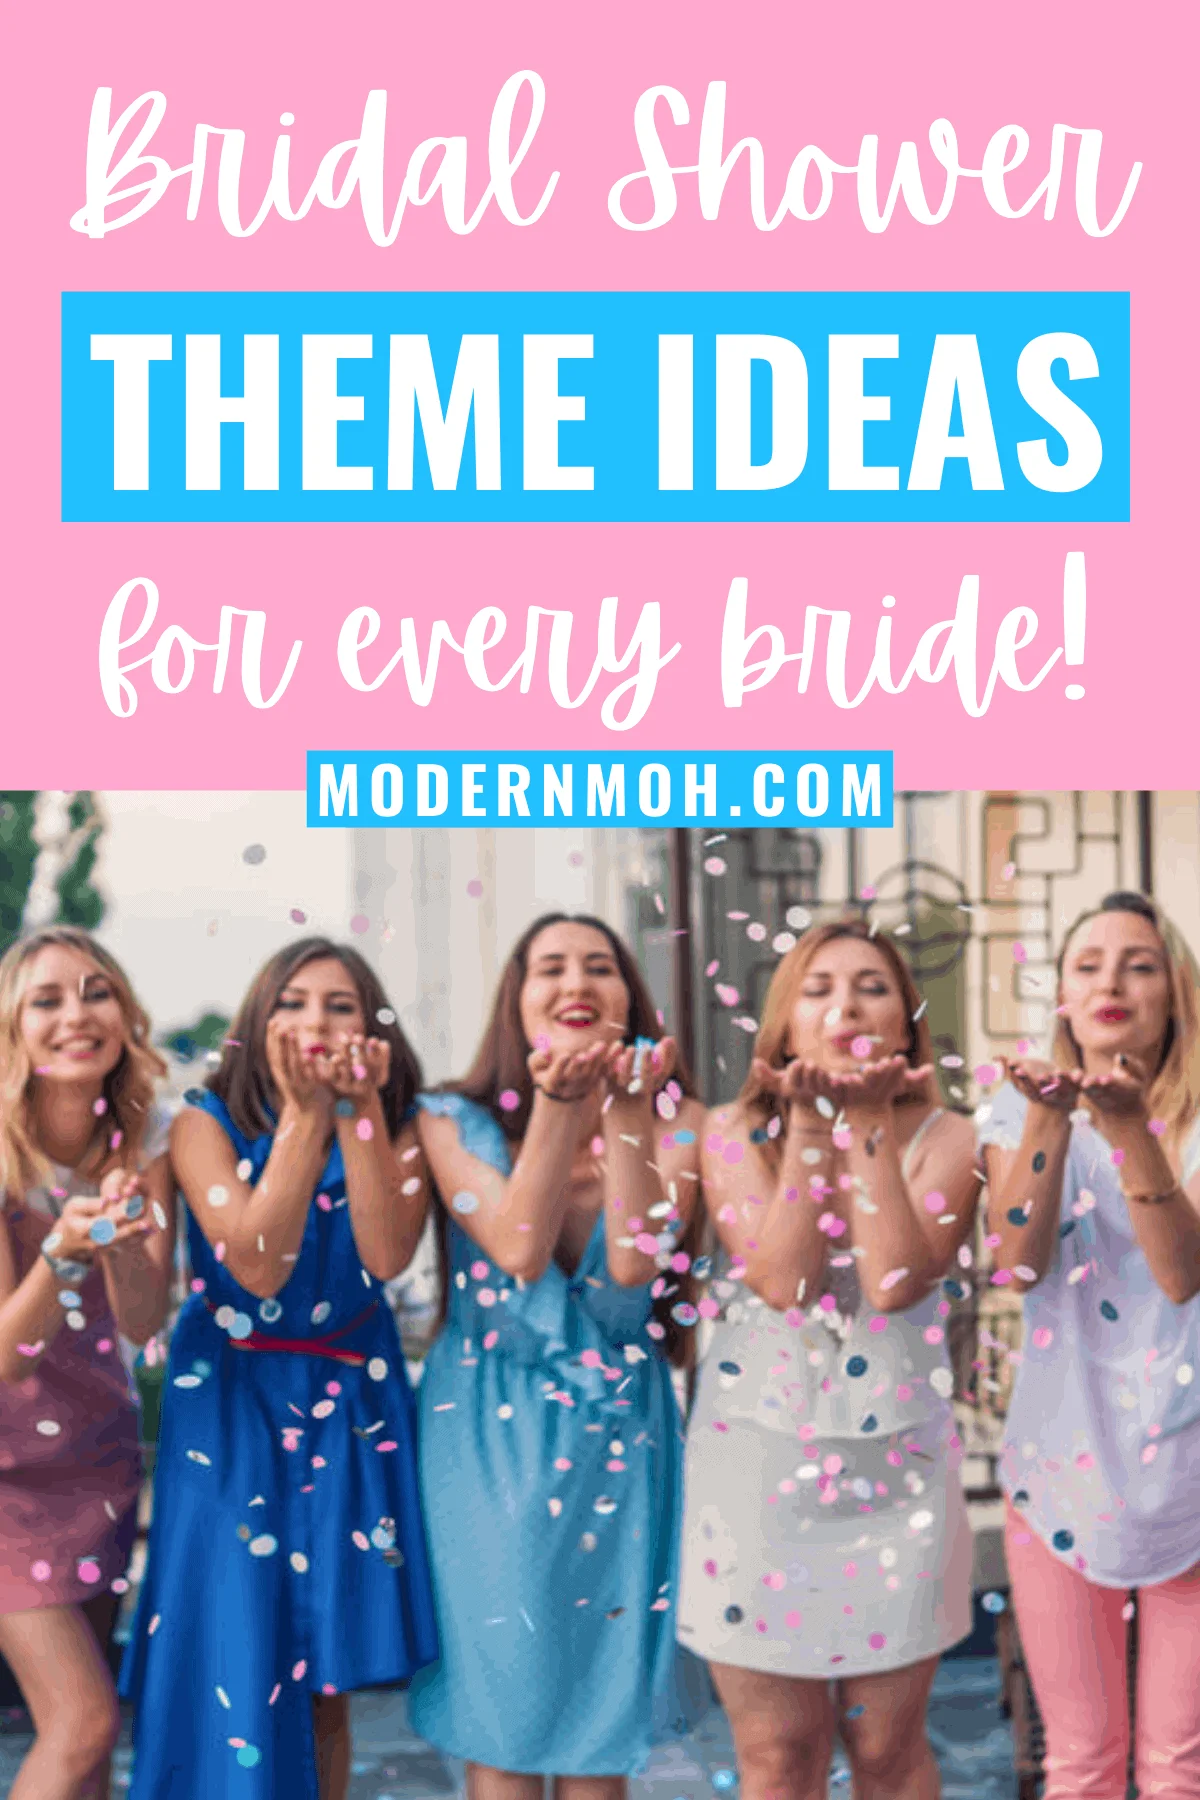 9 Bridal Shower Themes for the Modern Bride